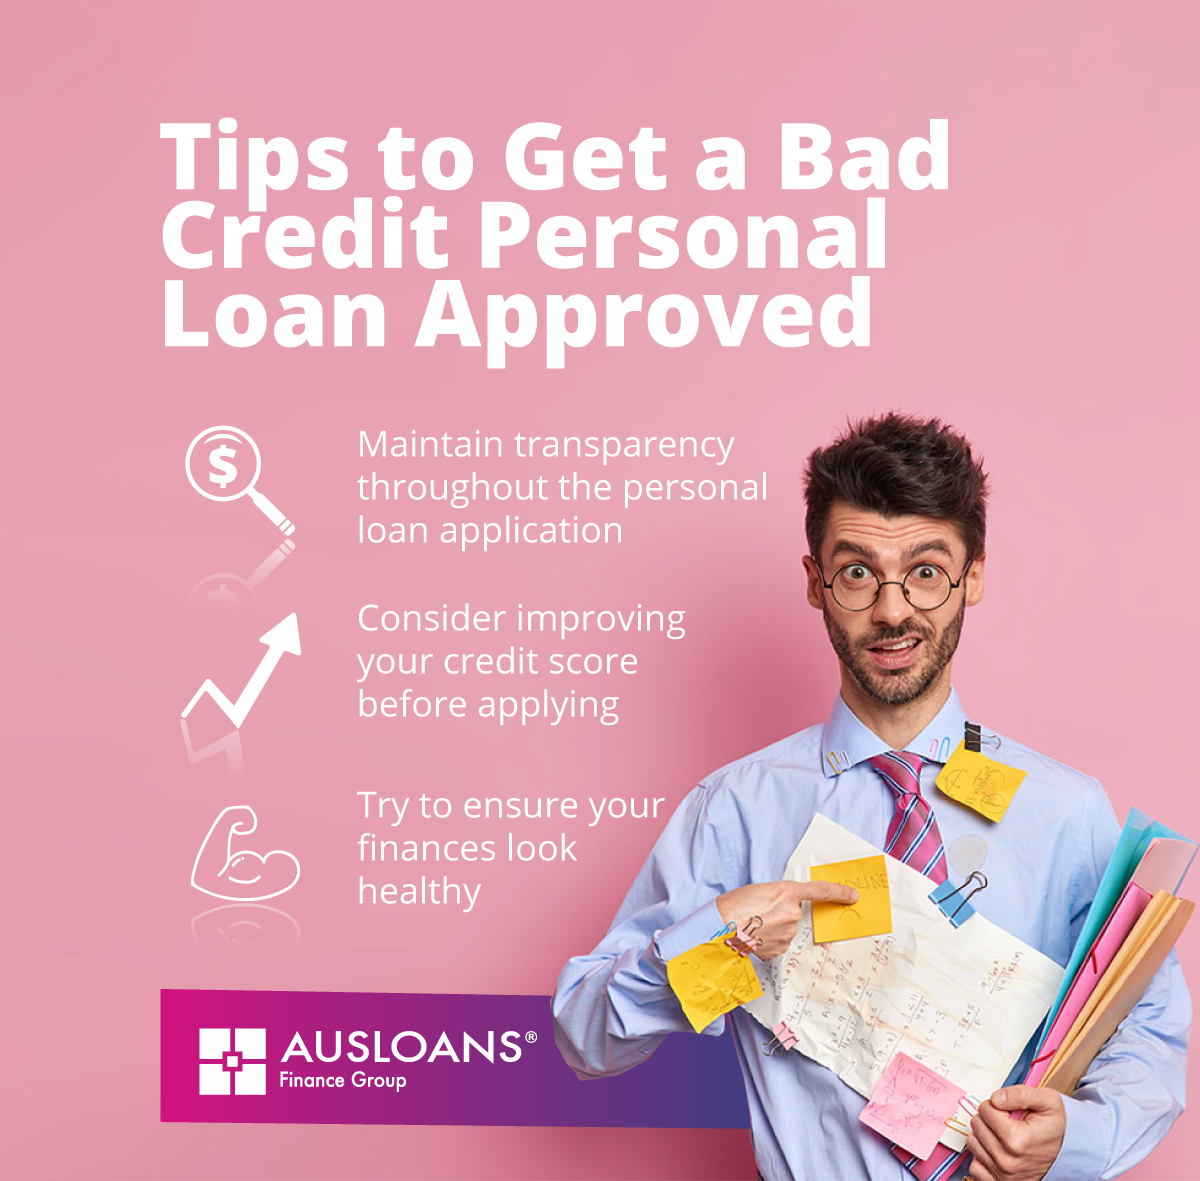 personal- tips for bad credit personal loan